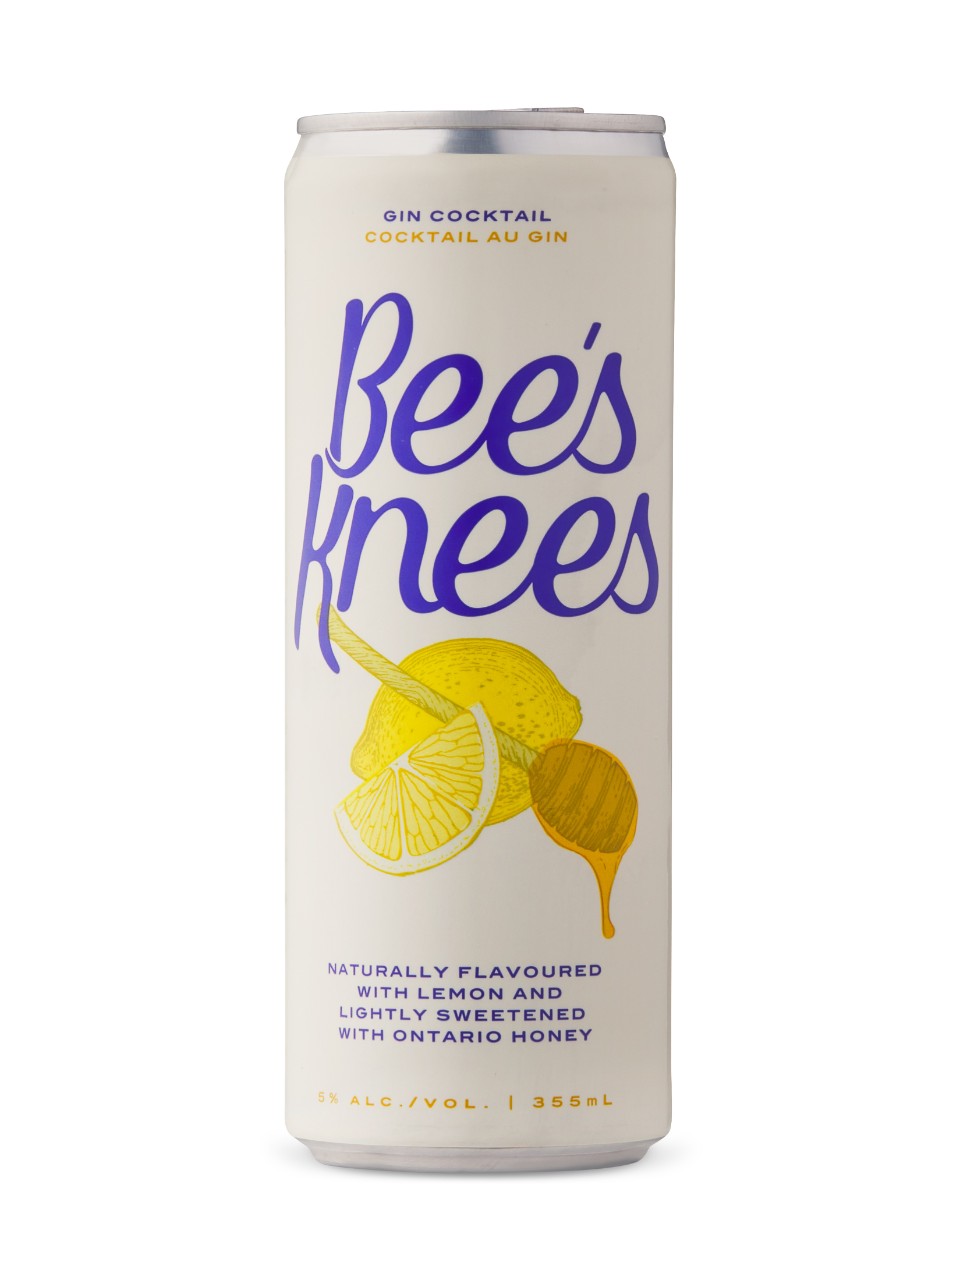 A can of Bee's Knees craft gin cocktail on a white background